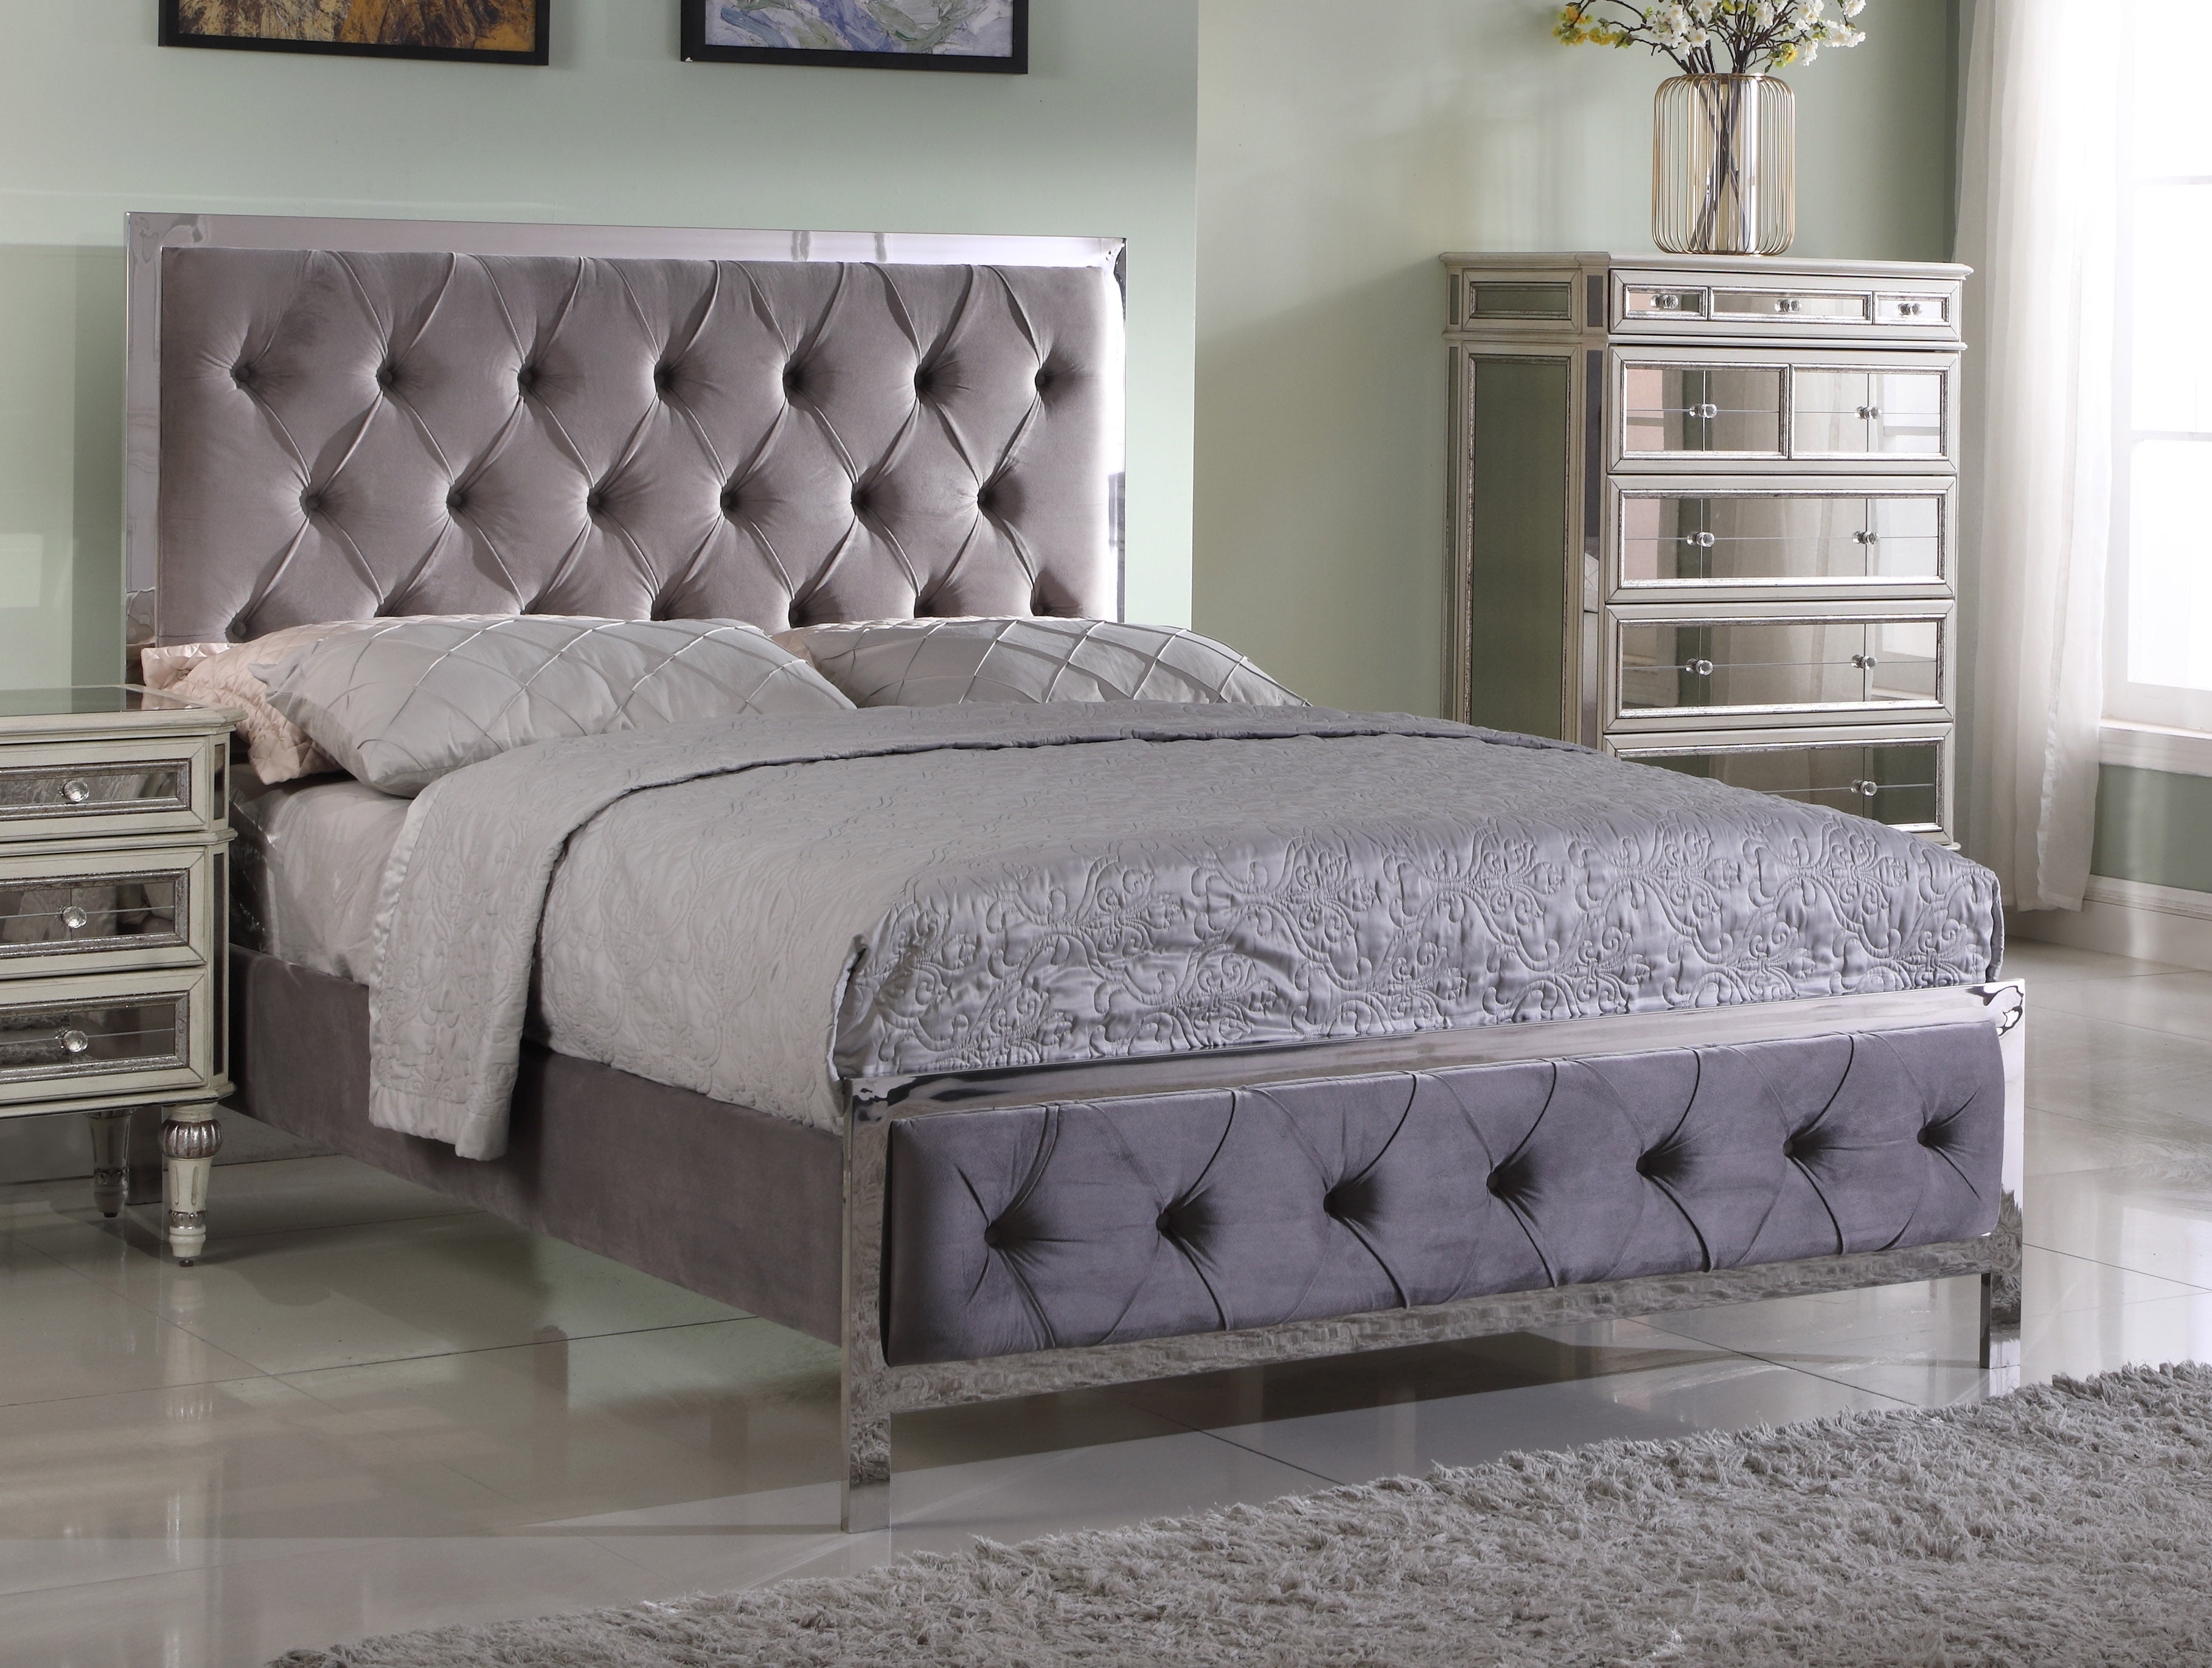 Details about   Baxton Studio Candace Velvet Nailhead Upholstered Queen Bed in Grey 